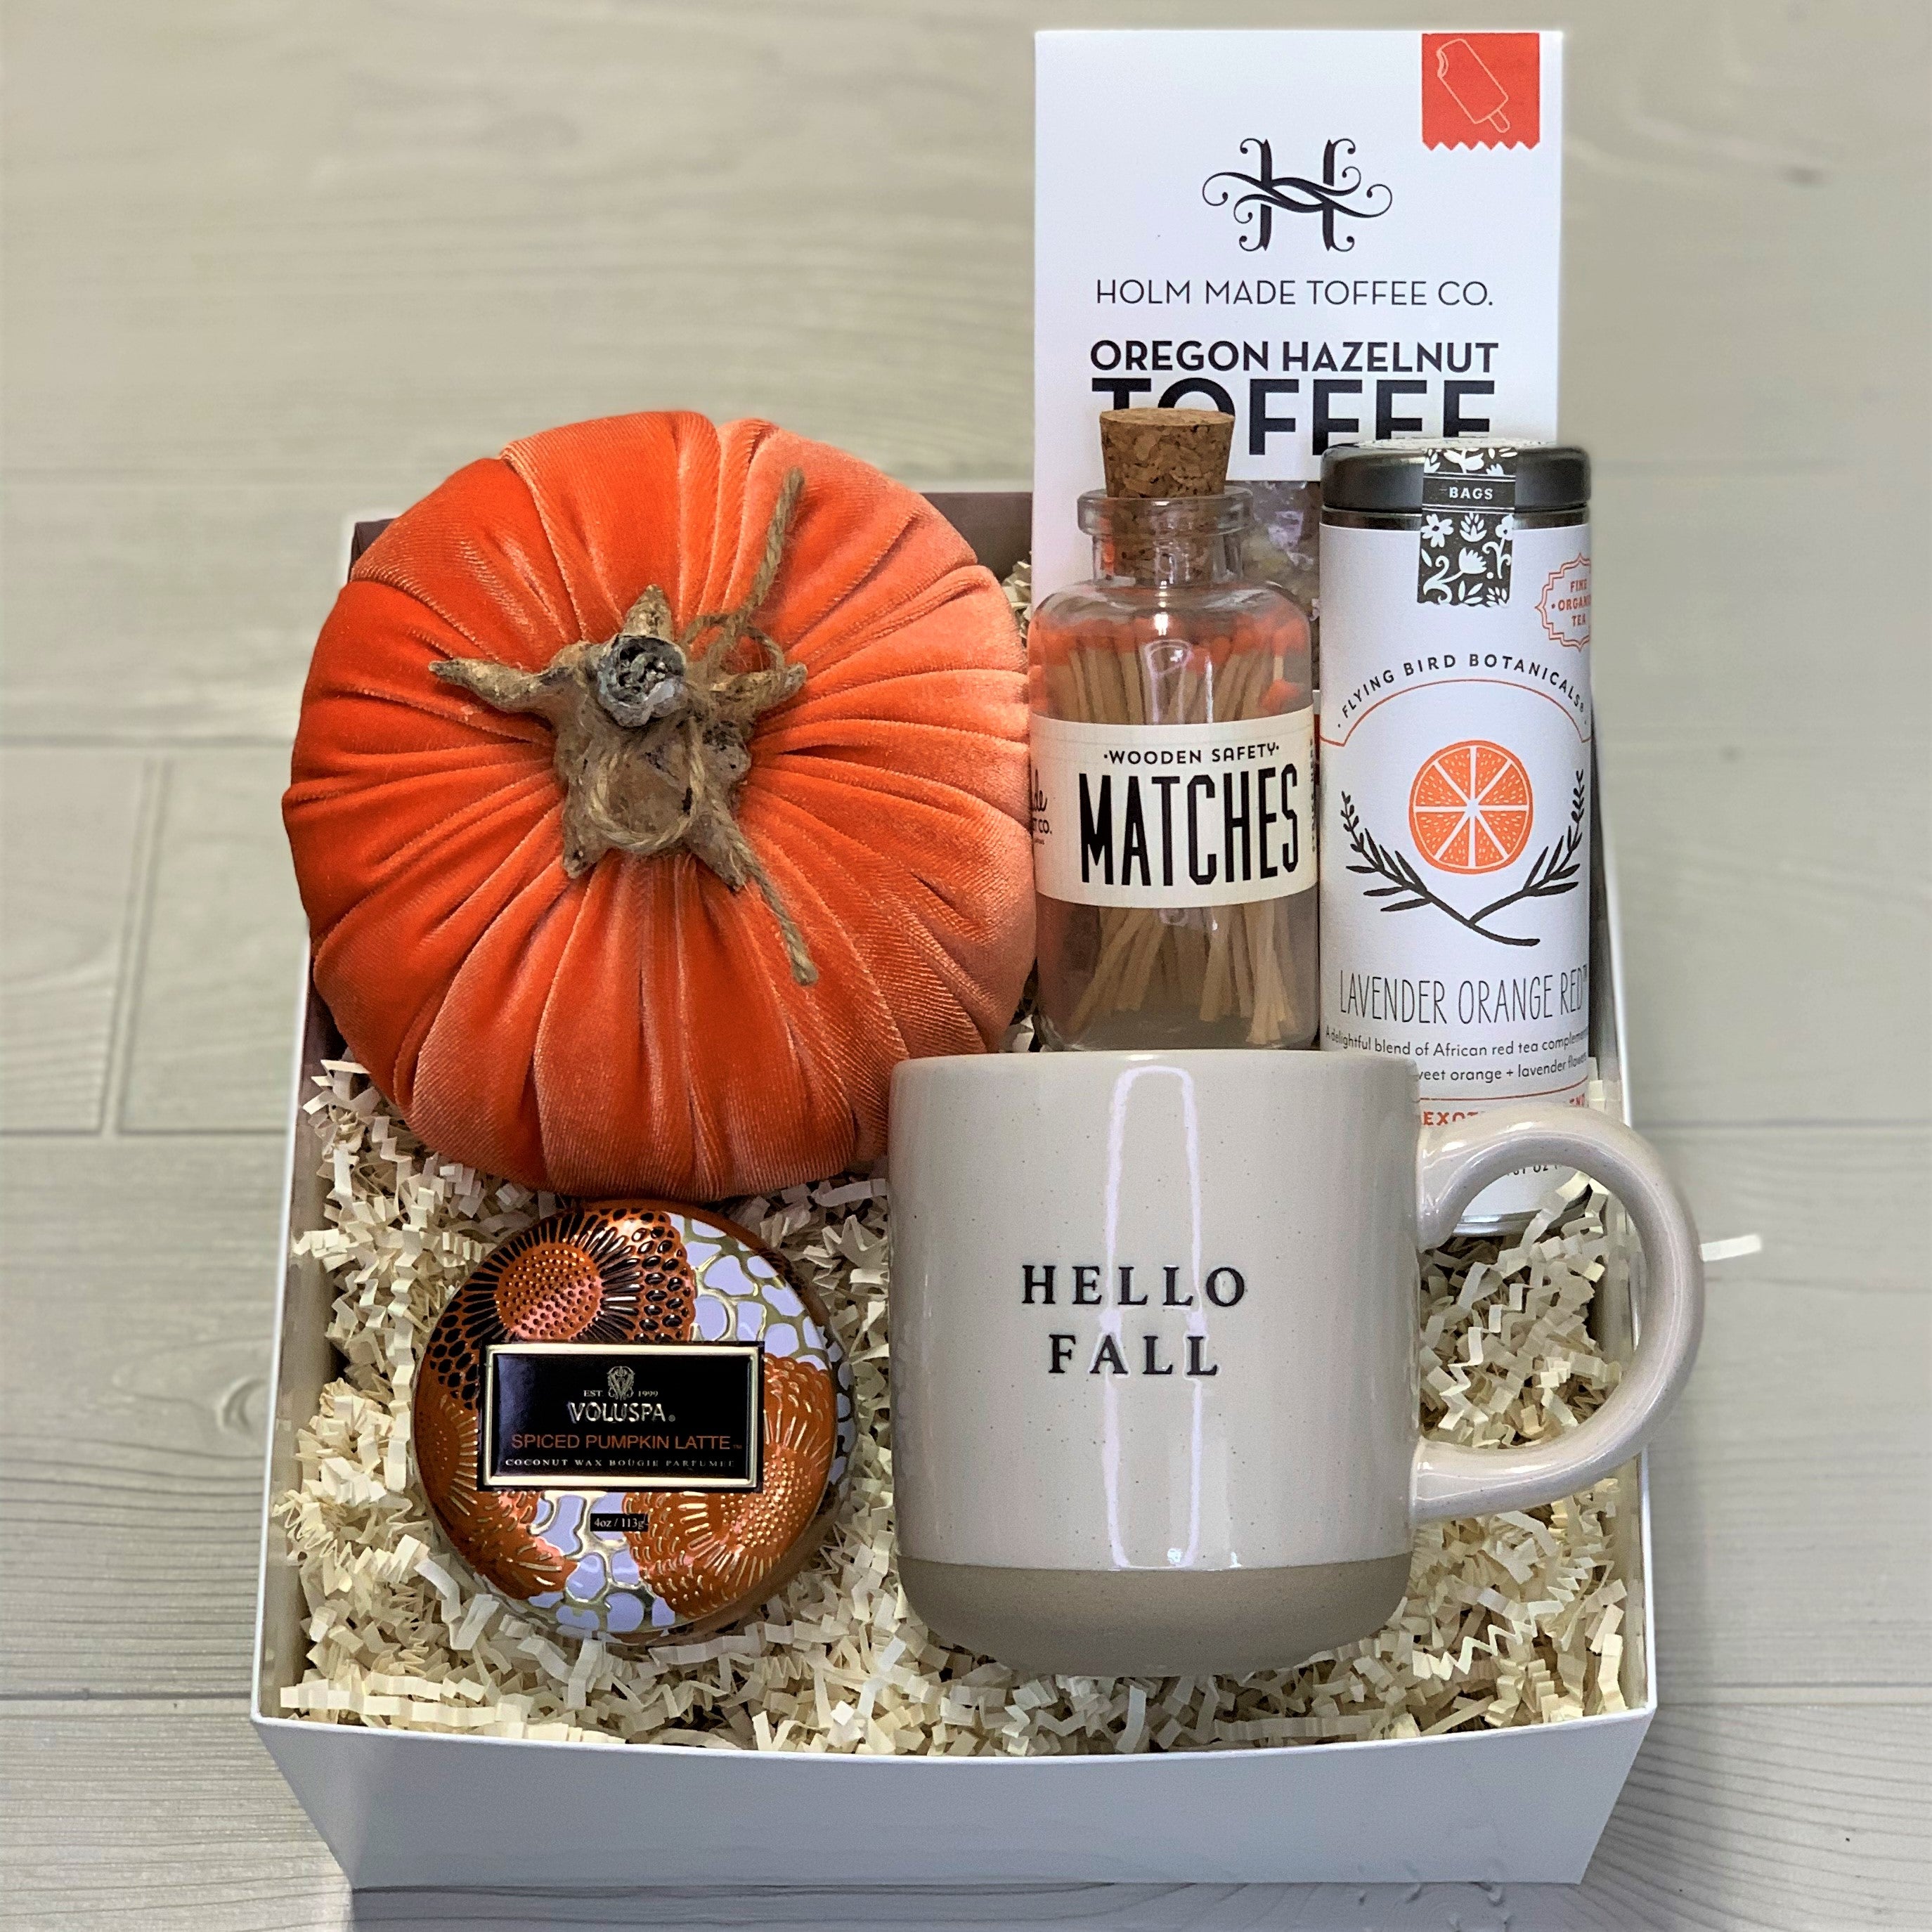 Fall gift basket includes a velvet pumpkin, toffee, tea, wooden matches, a Voluspa scented candle, and a ceramic mug